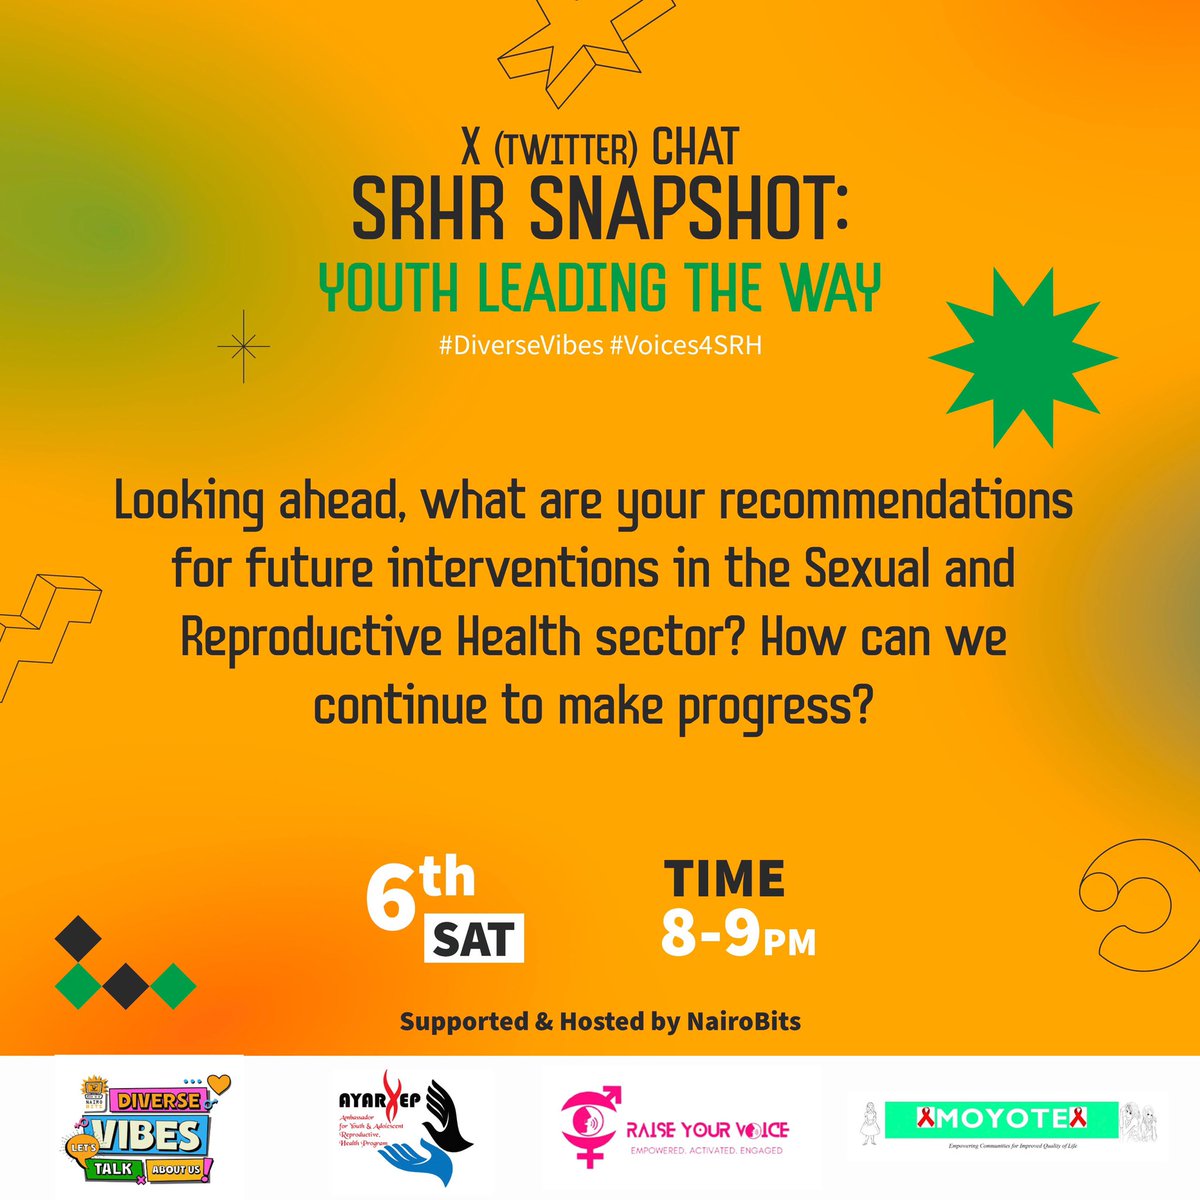 @Nairobits @MoyoteKenya @RHRNKenya @AYARHEP_KENYA Q 7. Looking ahead, what are your recommendations for future interventions in the Sexual and Reproductive Health sector? How can we continue to make progress? #Voices4SRH #DiverseVibes @Nairobits @MoyoteKenya @RHRNKenya @AYARHEP_KENYA